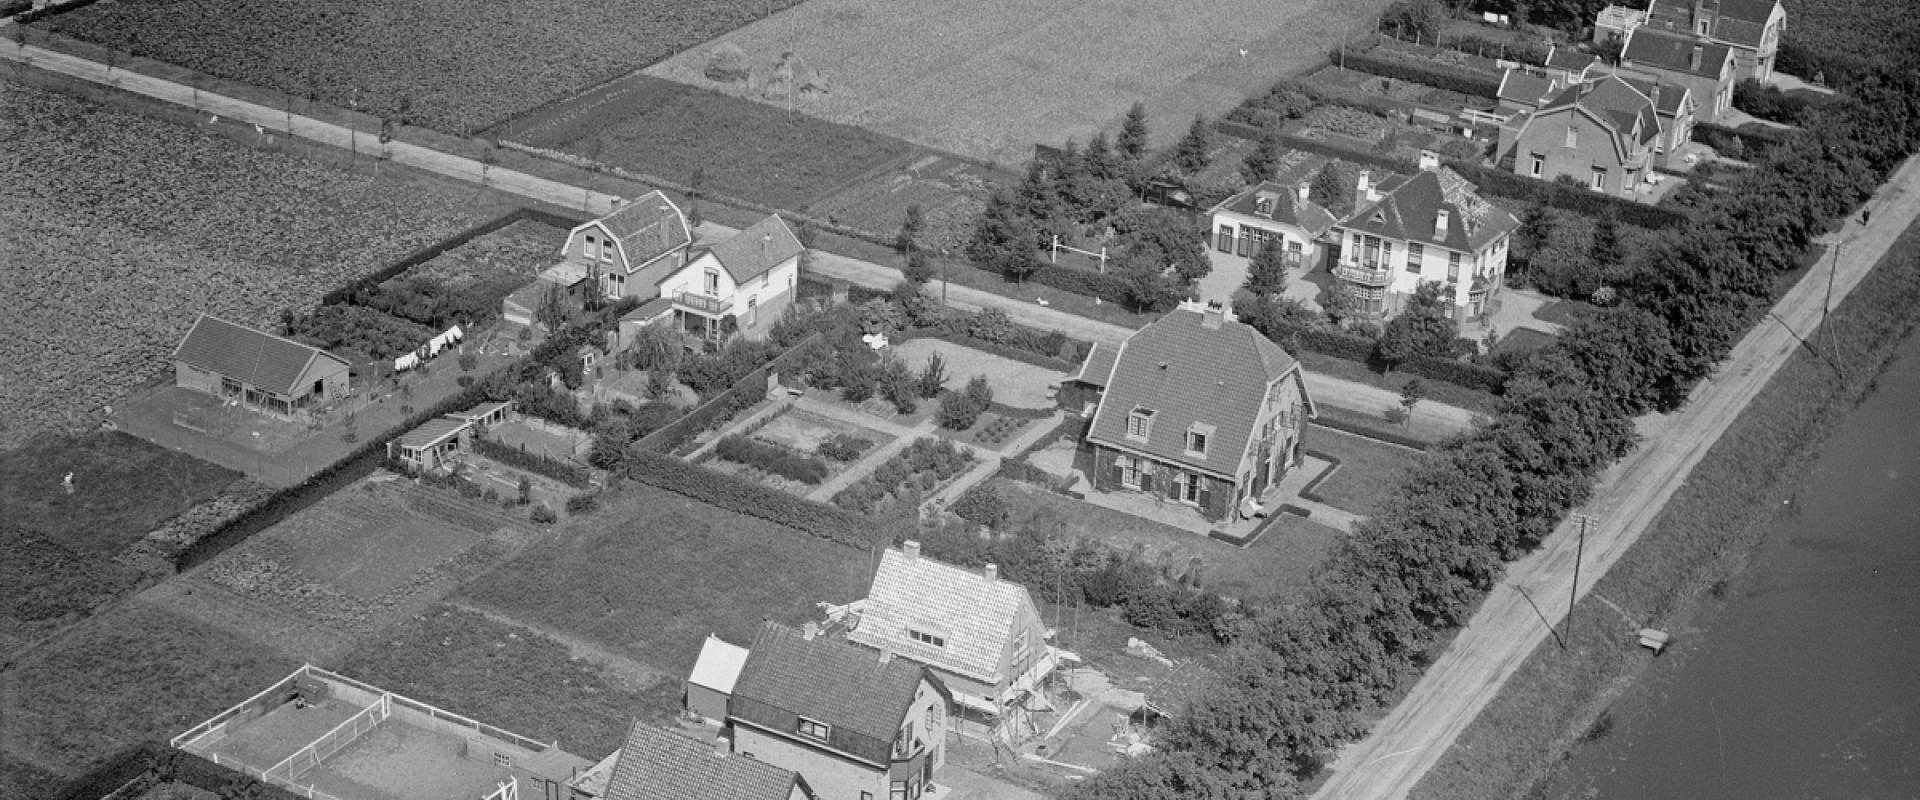 Aerial view in black and white.